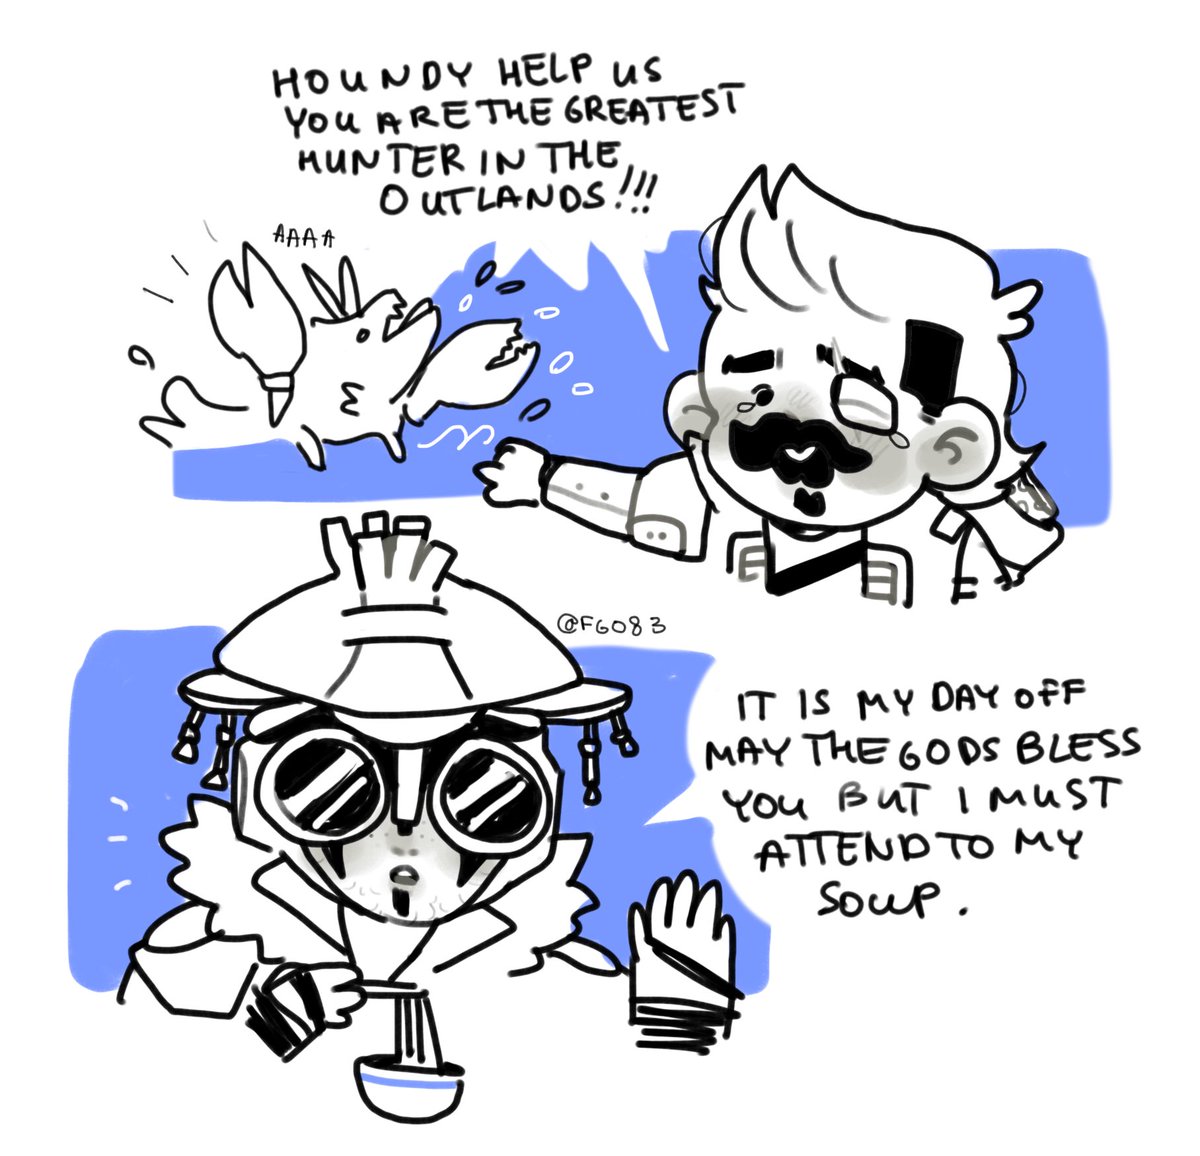 bloodhound didnt participate in the space lobster hunt bc they werent clocked in and it sounded like the problem for the people on the clock while they had their soup to attend to #apexlegends 